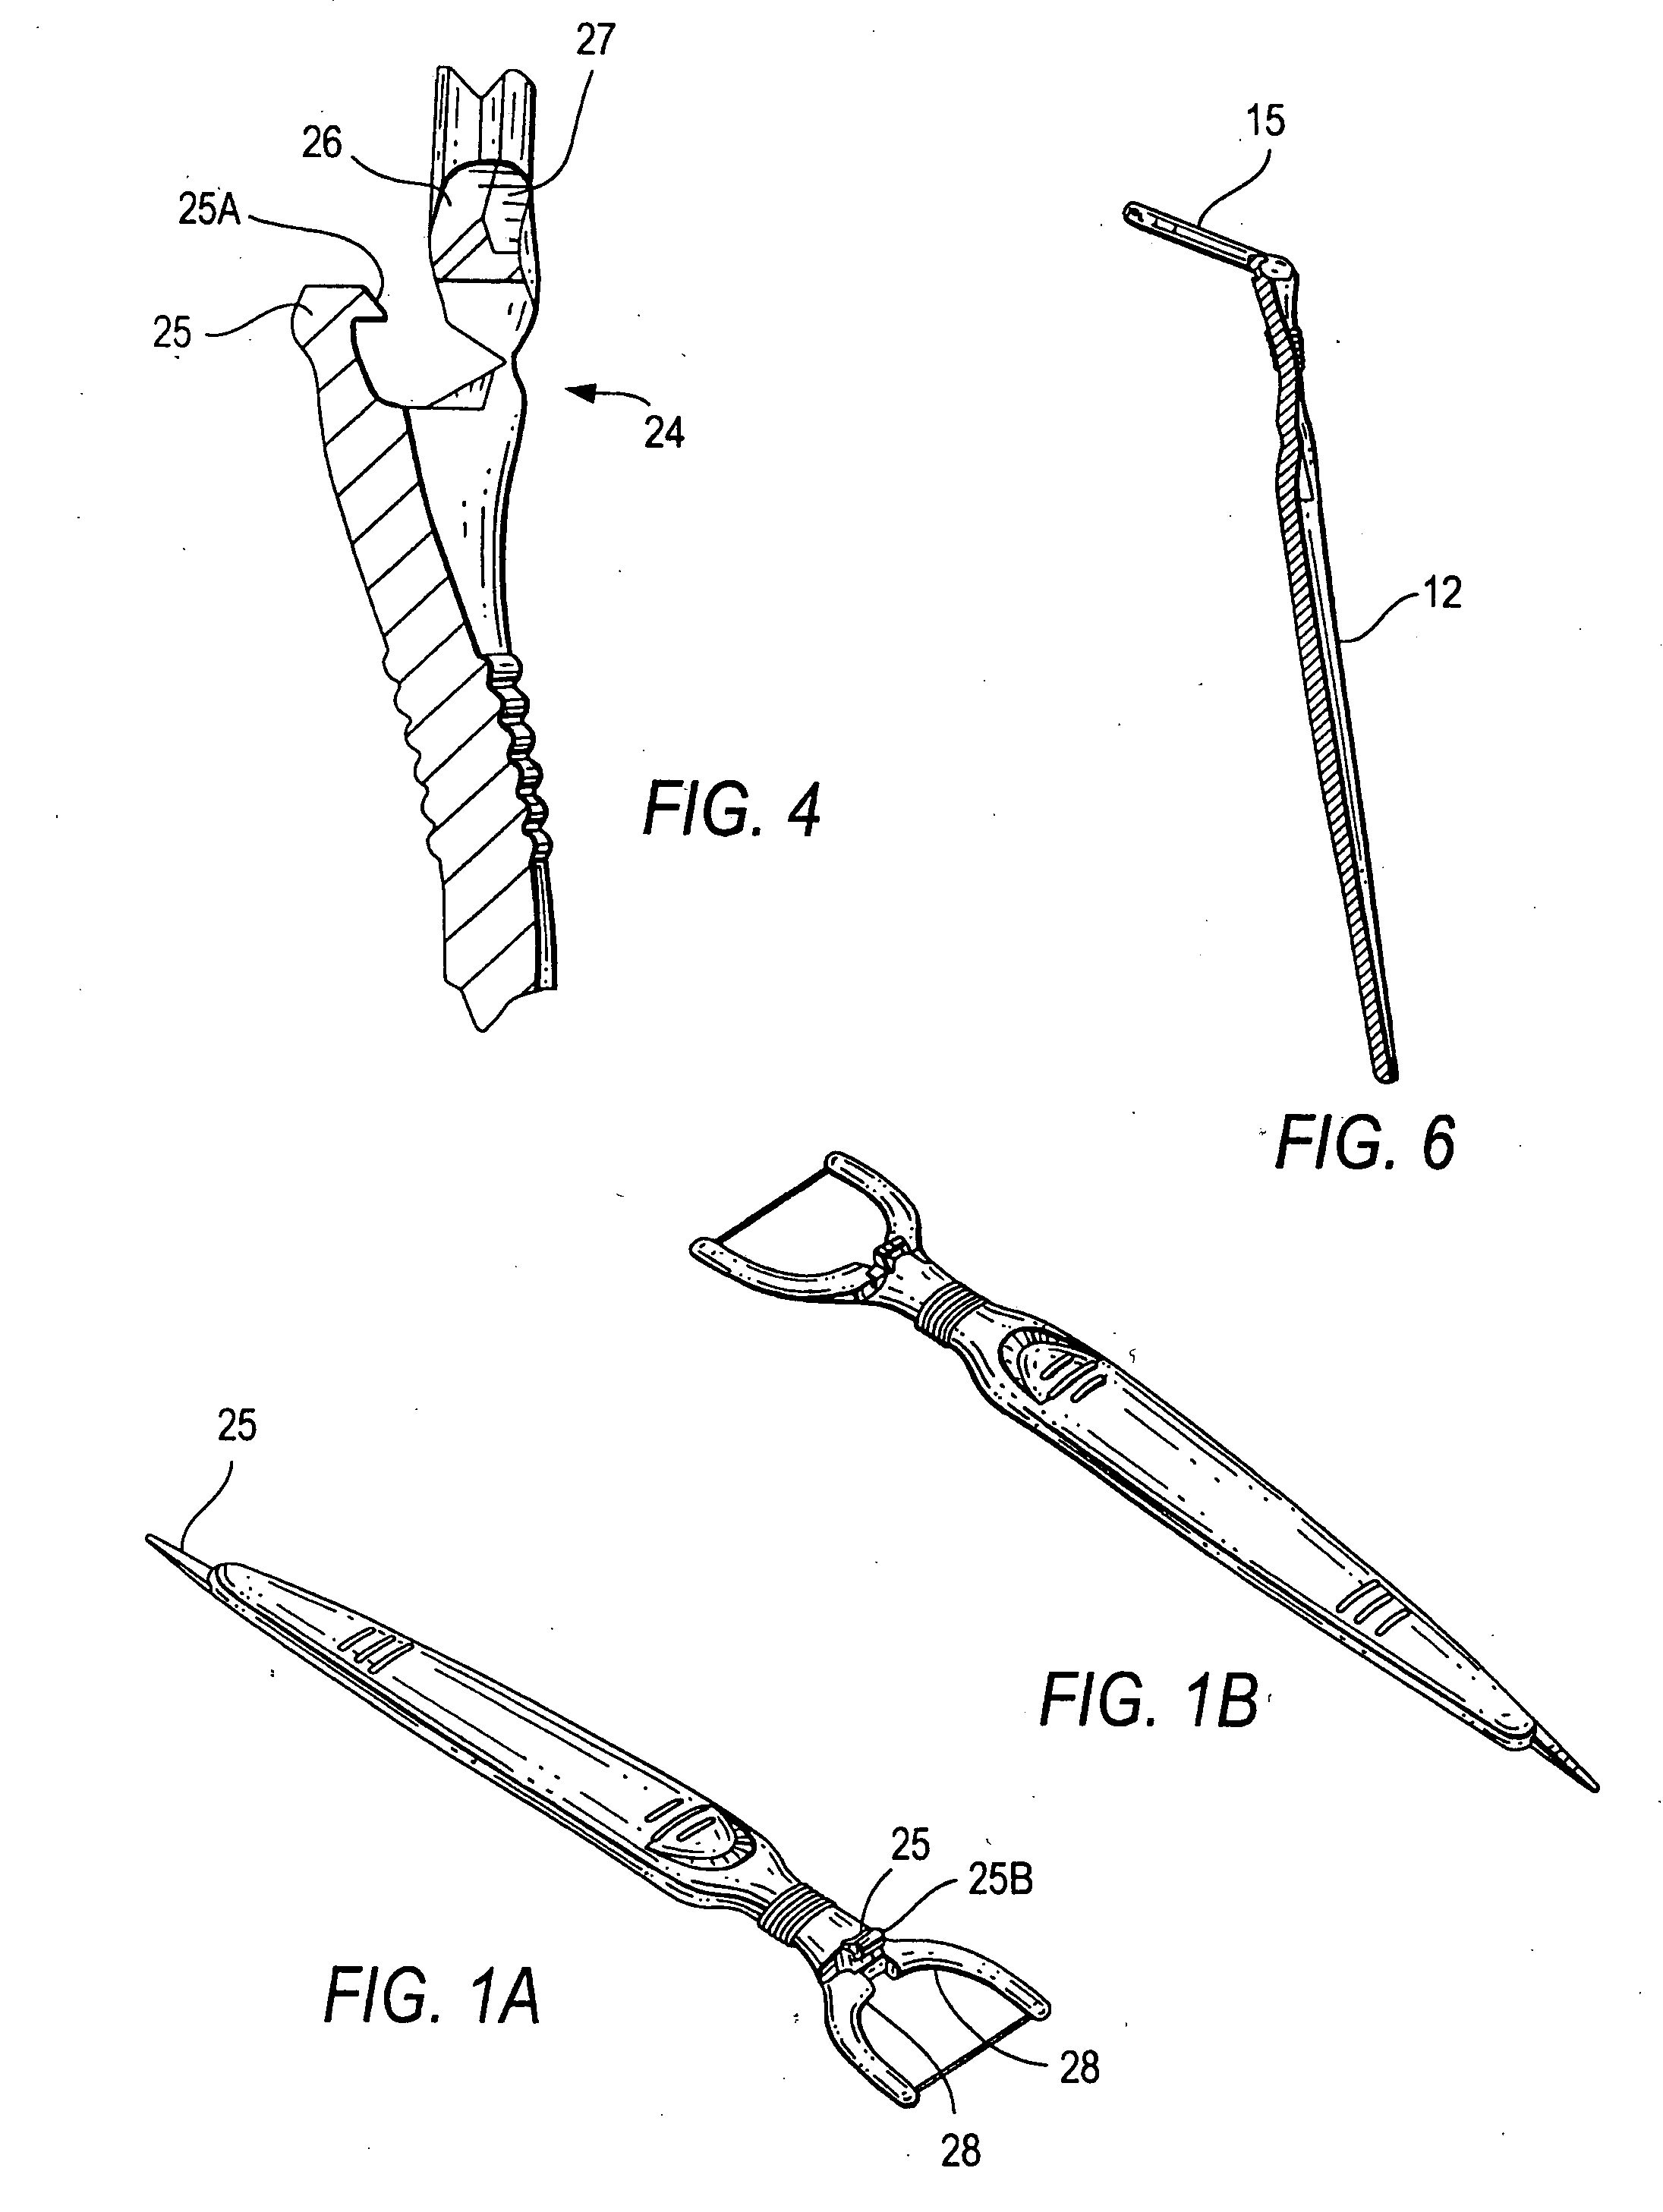 Dental flosser with bendable head